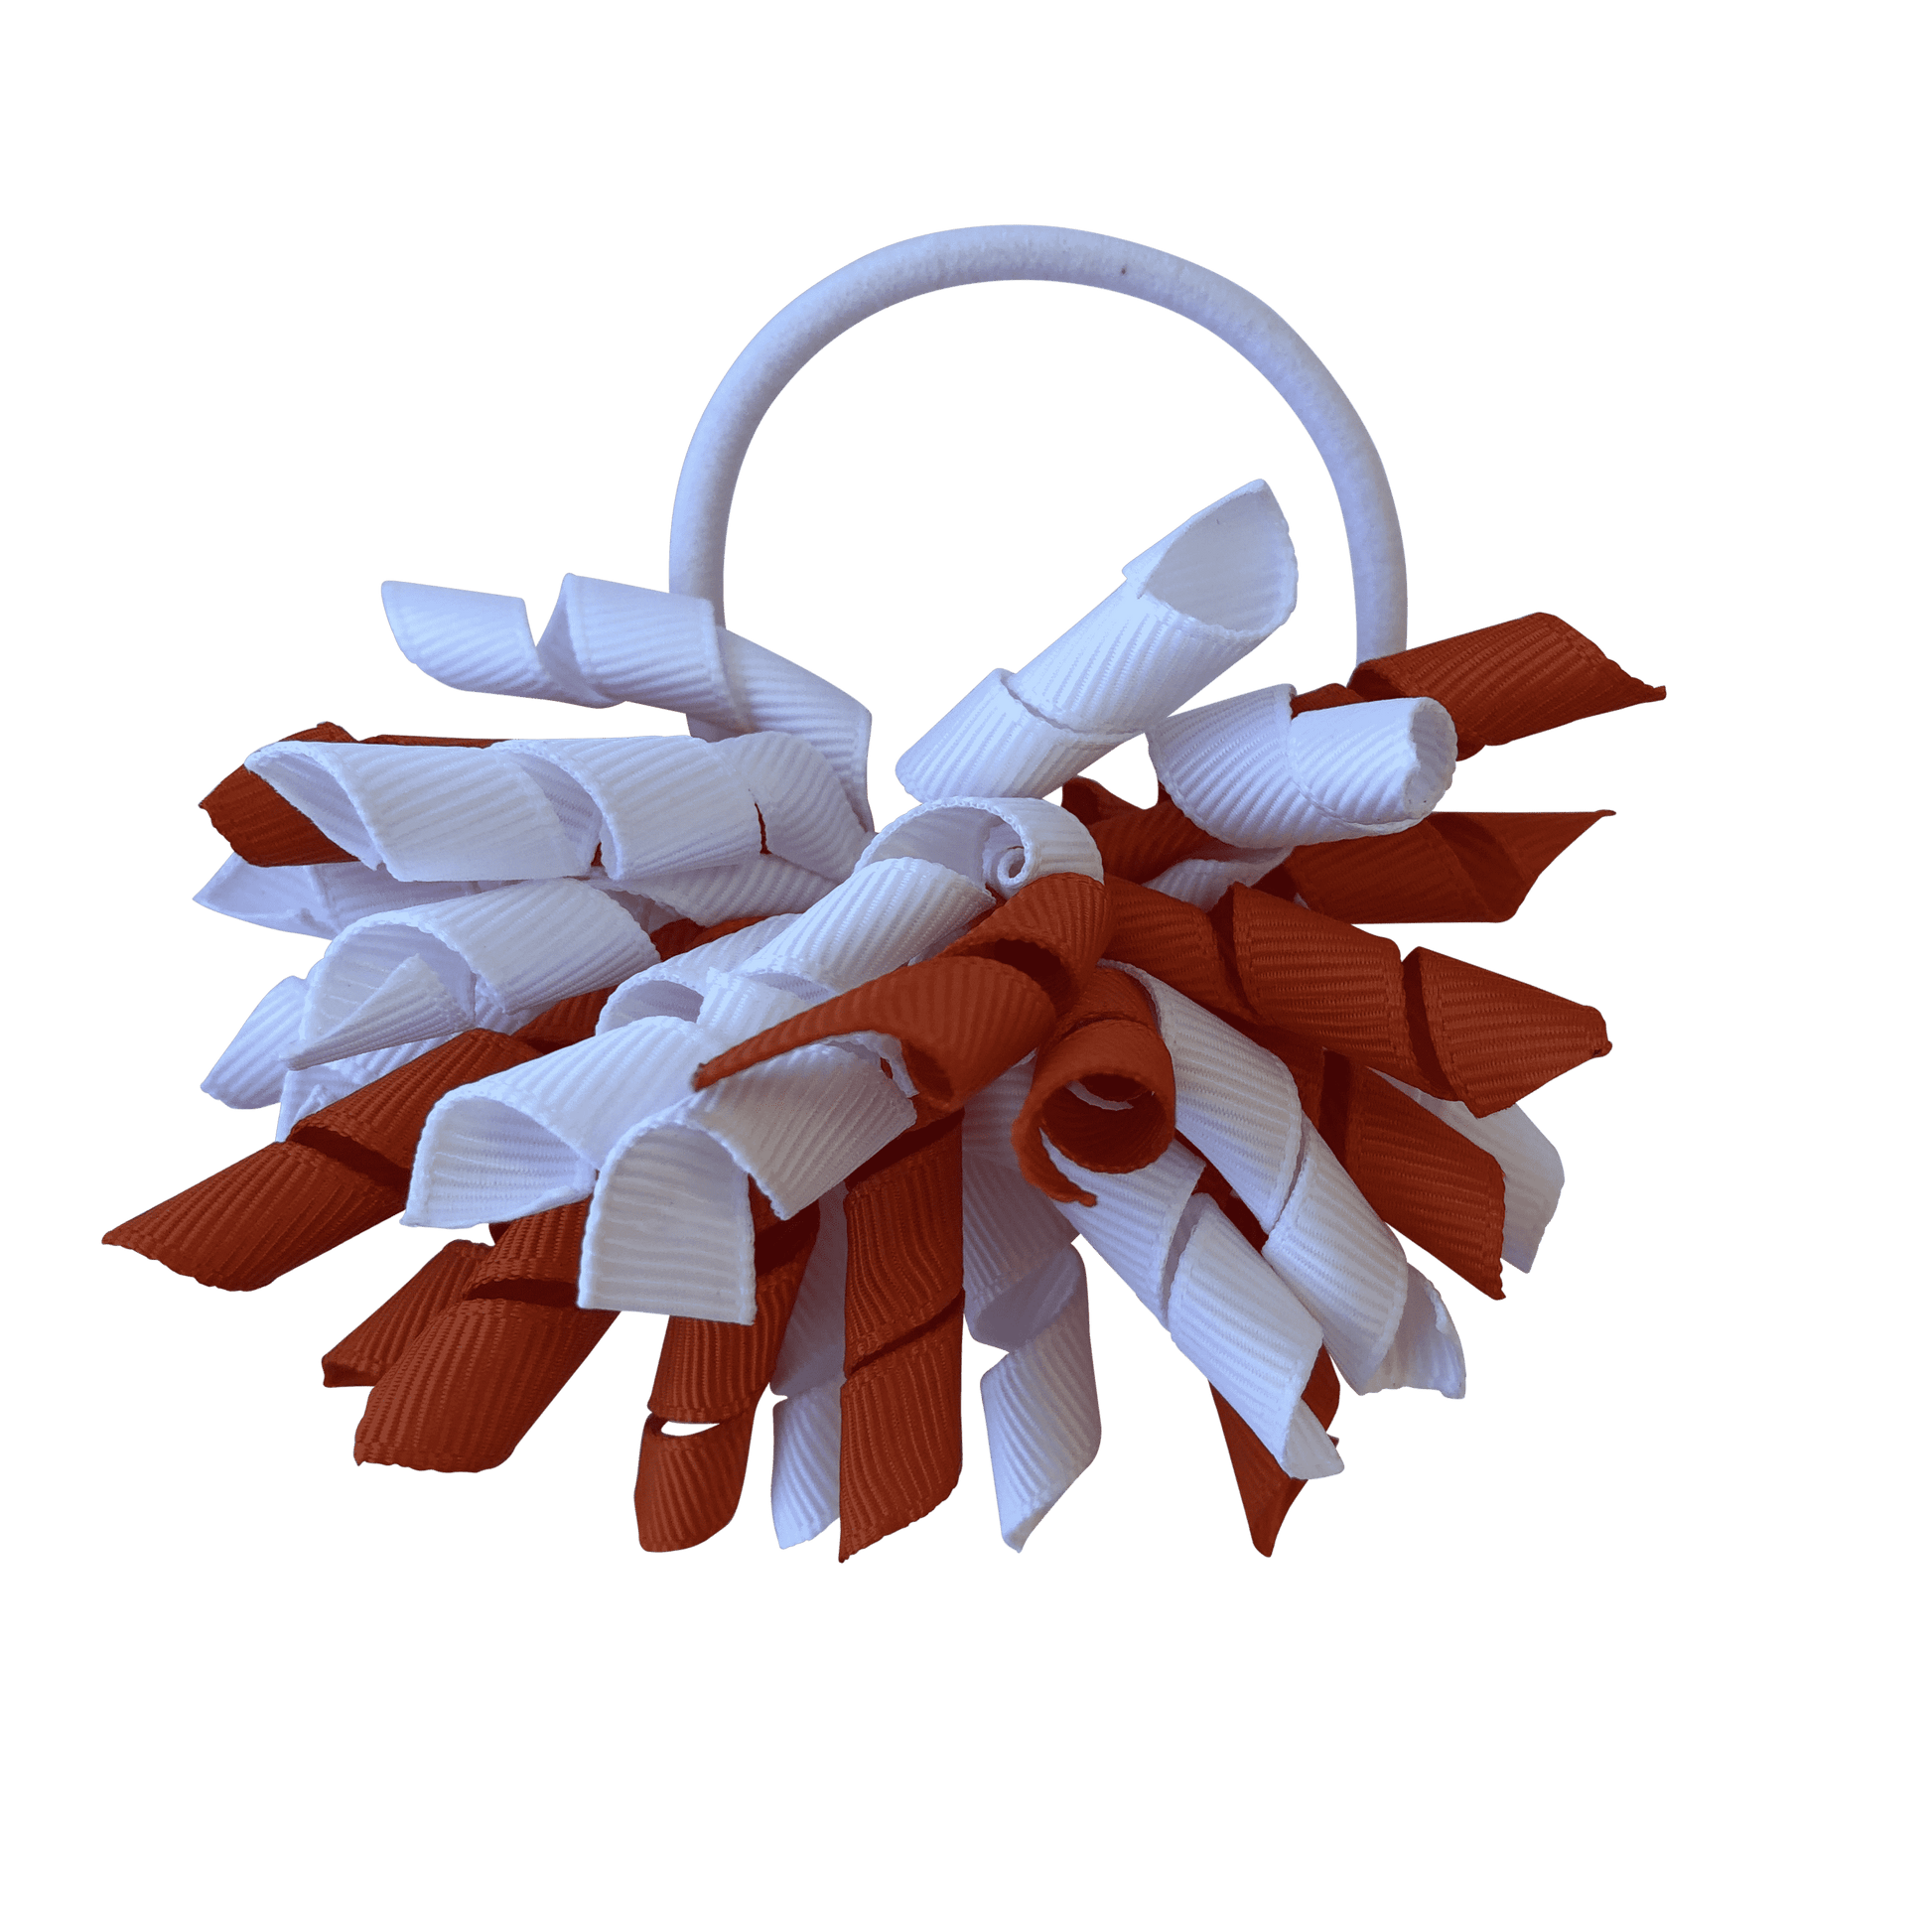 Orange & White Hair Accessories - Assorted Hair Accessories - School Uniform Hair Accessories - Ponytails and Fairytales